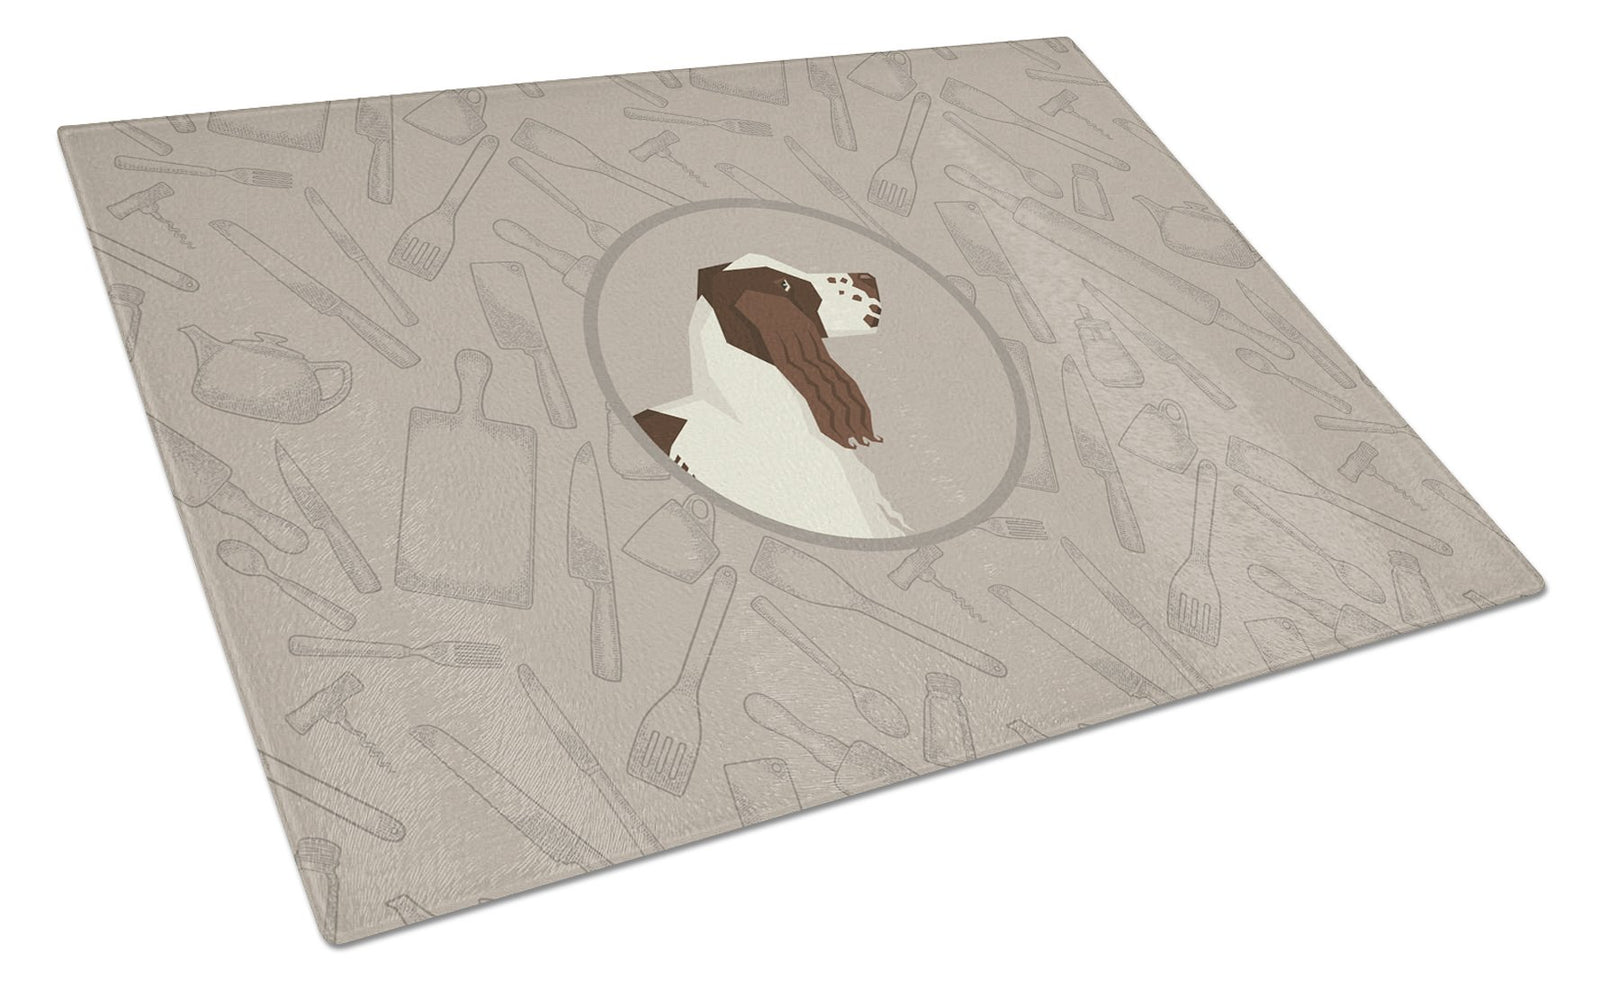 English Springer Spaniel In the Kitchen Glass Cutting Board Large CK2184LCB by Caroline's Treasures